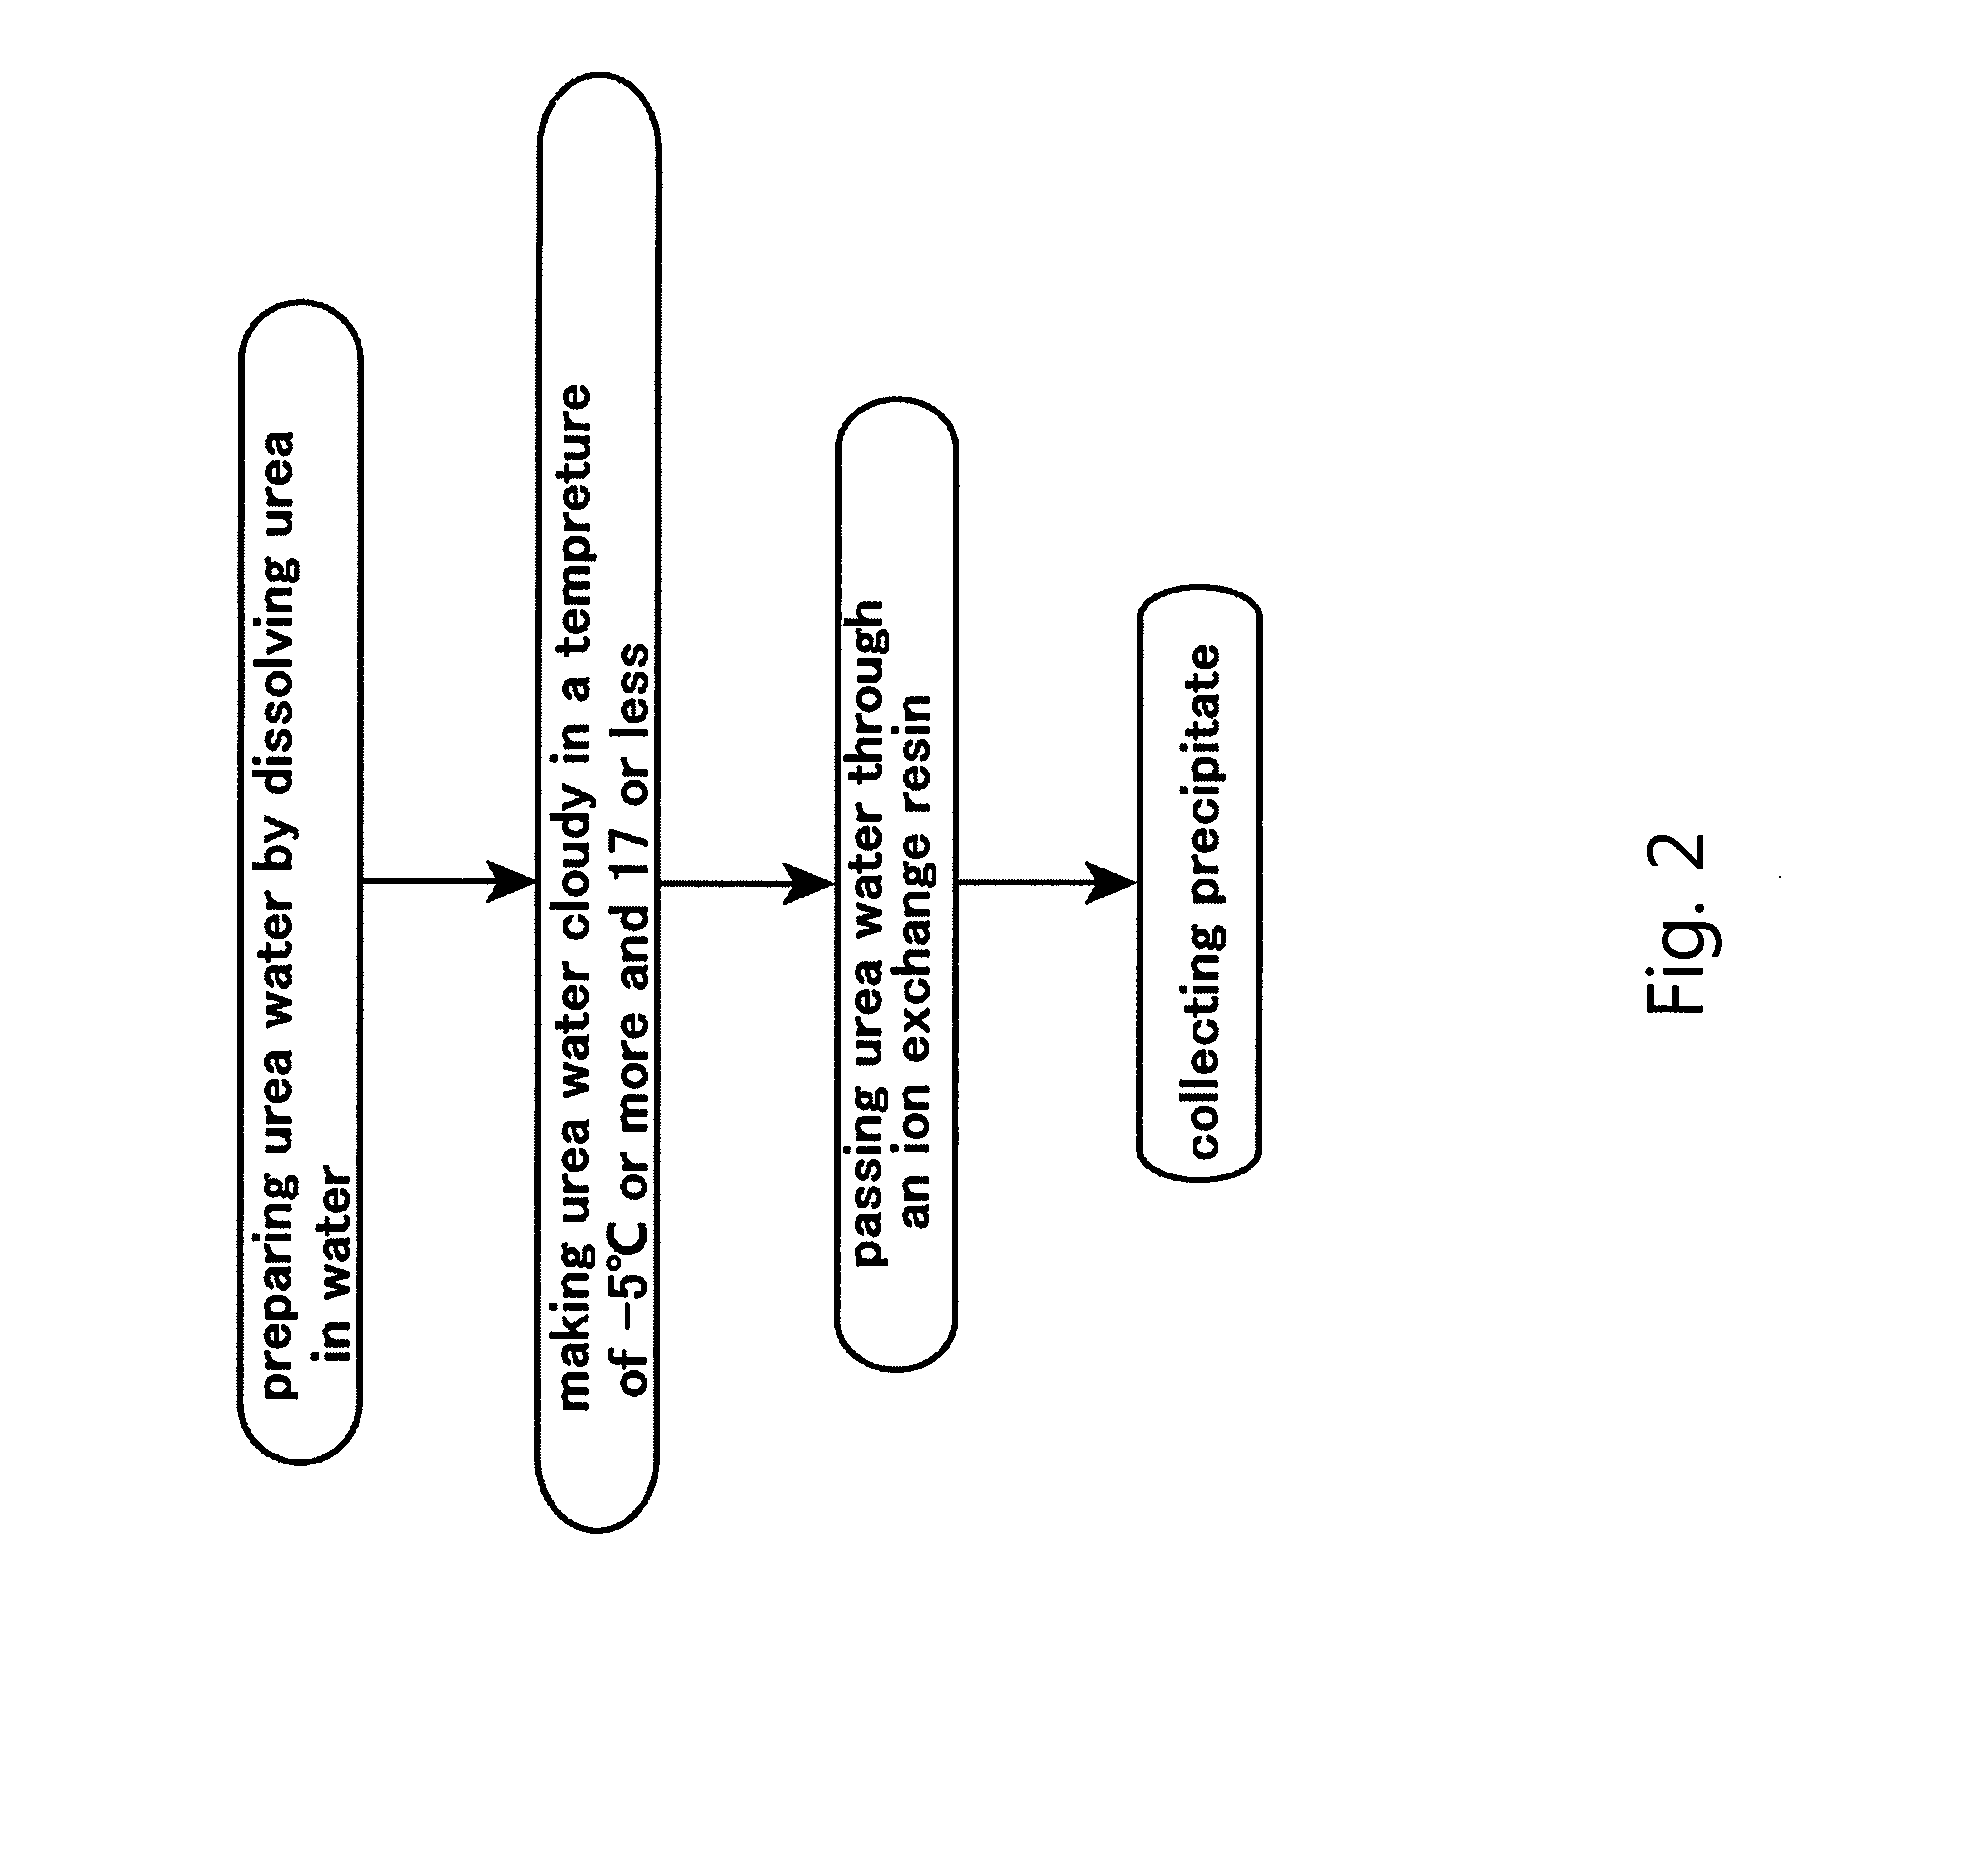 Method for preparing urea water, method for removing triuret from urea water and method for collecting triuret from aqueous solution